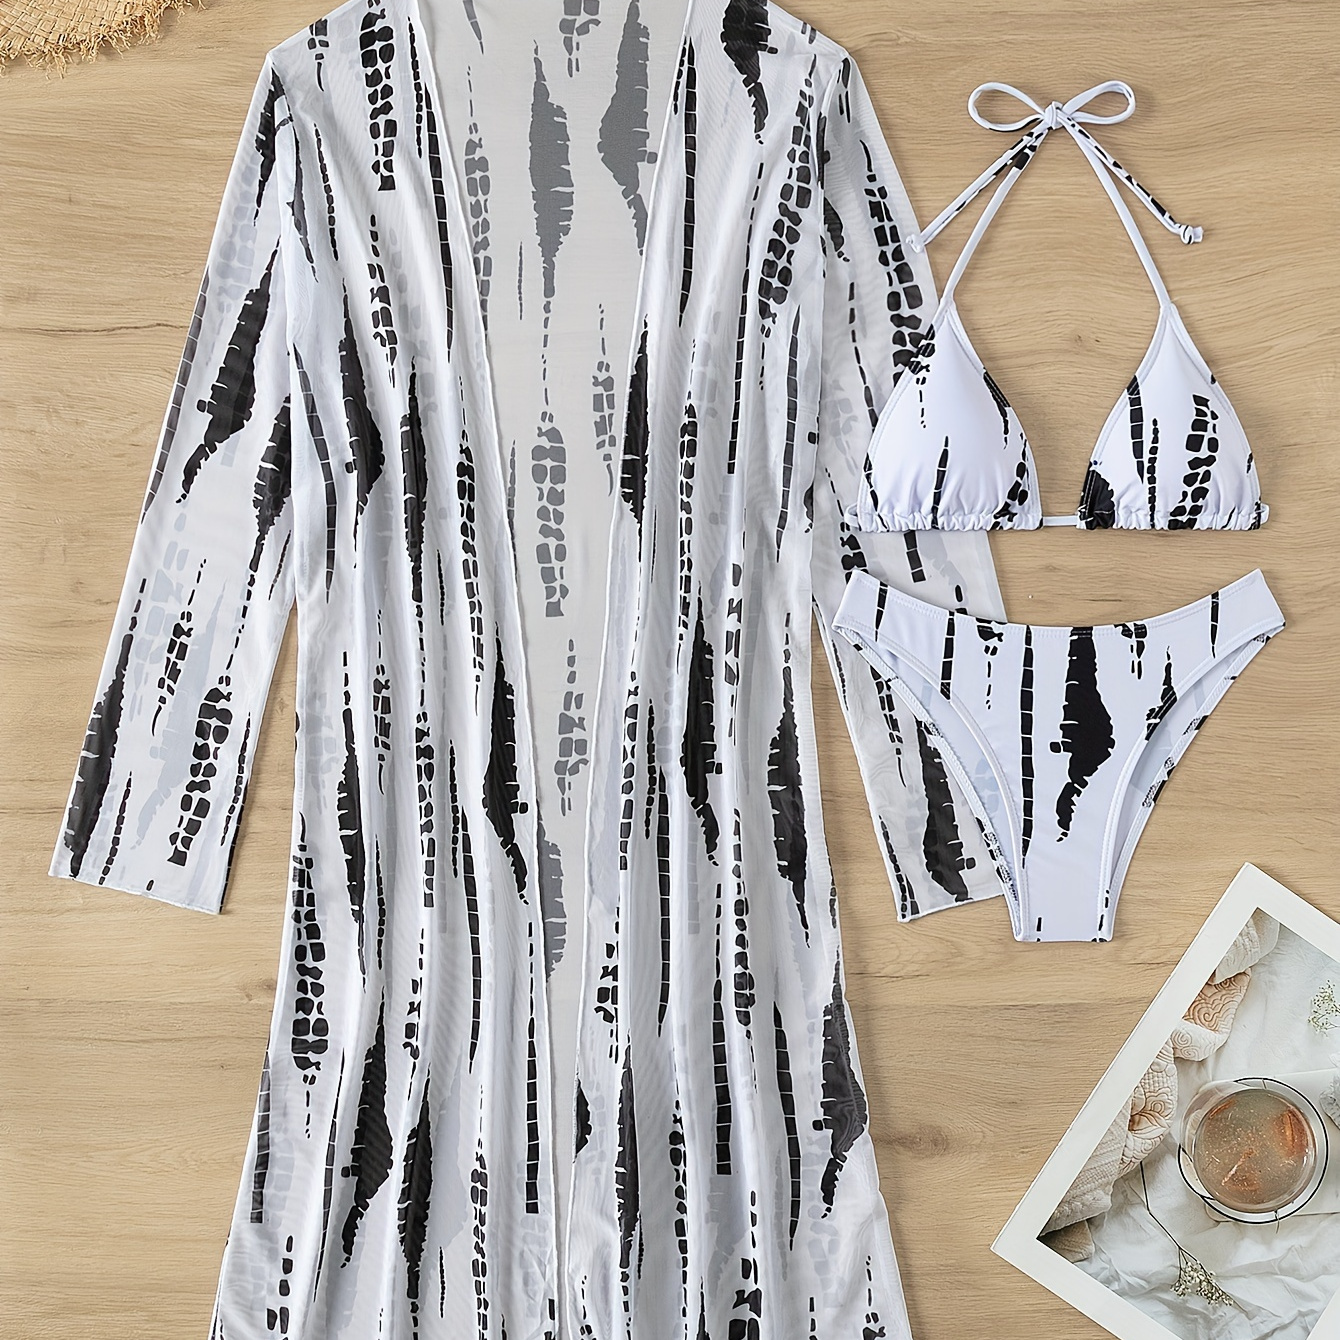 

Allover Print 3 Piece Set Bikini, V Neck High Cut With Cover Up Shirt Swimsuits, Women's Swimwear & Clothing Triangle Top